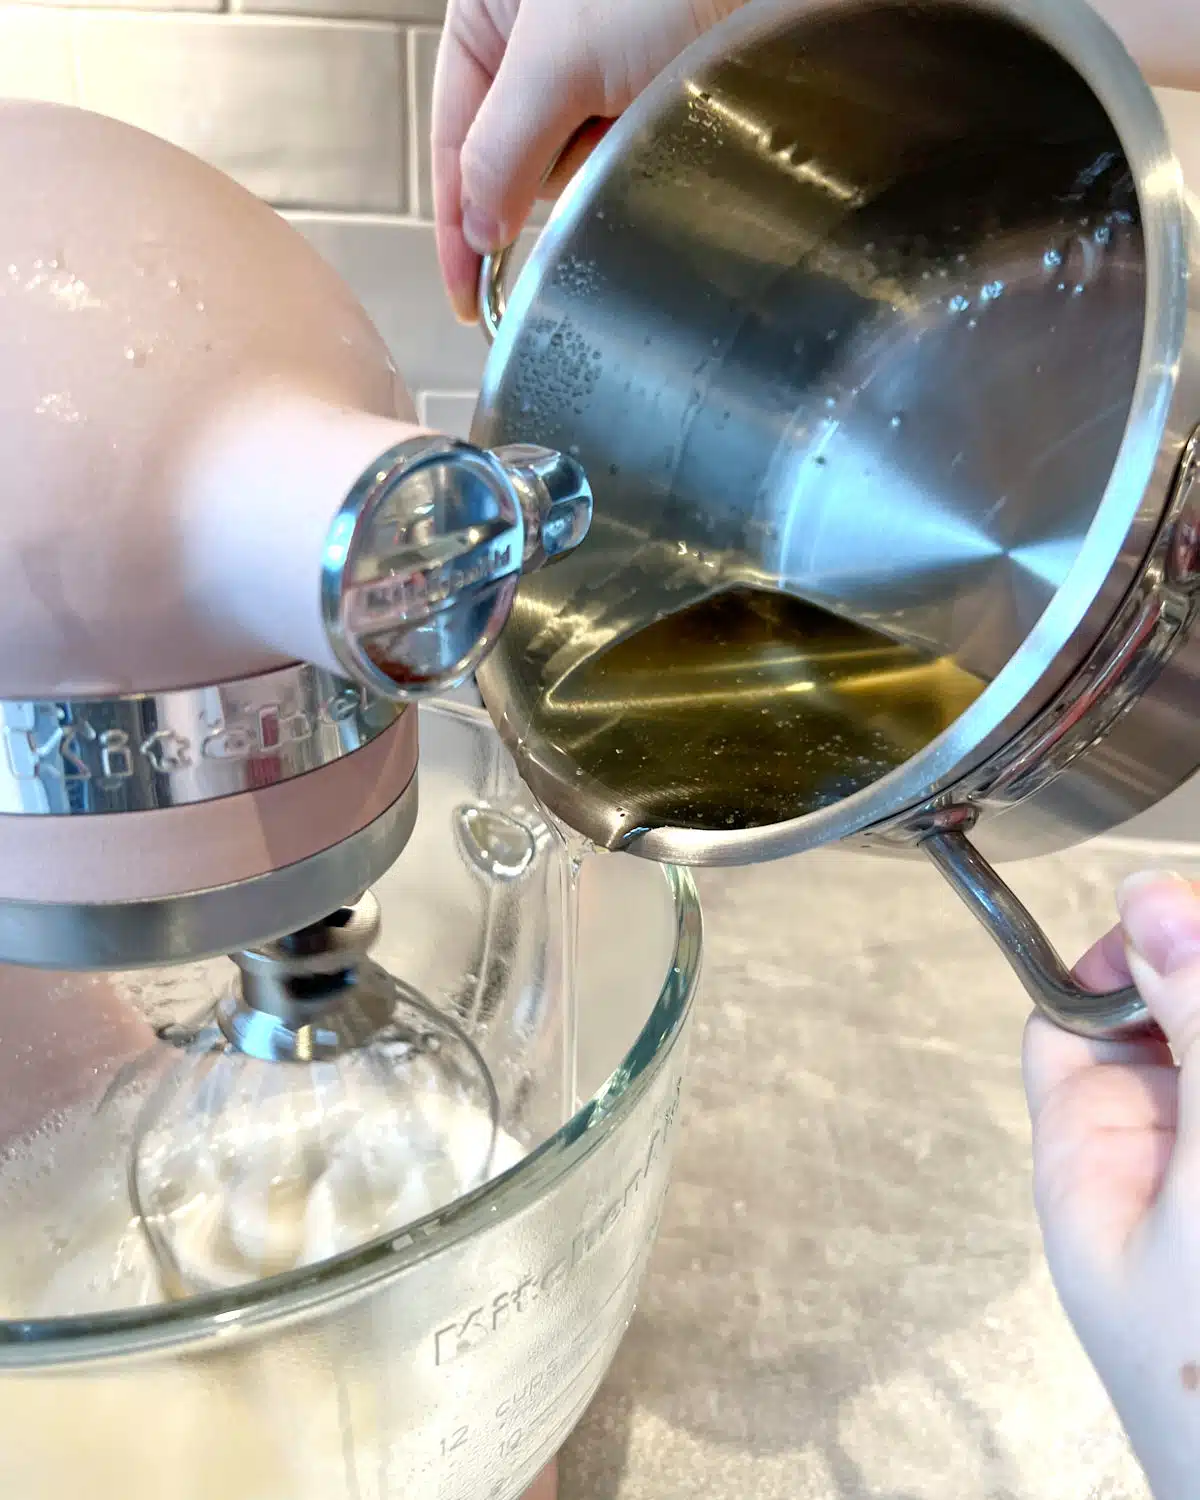 Pouring sugar syrup into gelatine to make chocolate marshmallows.